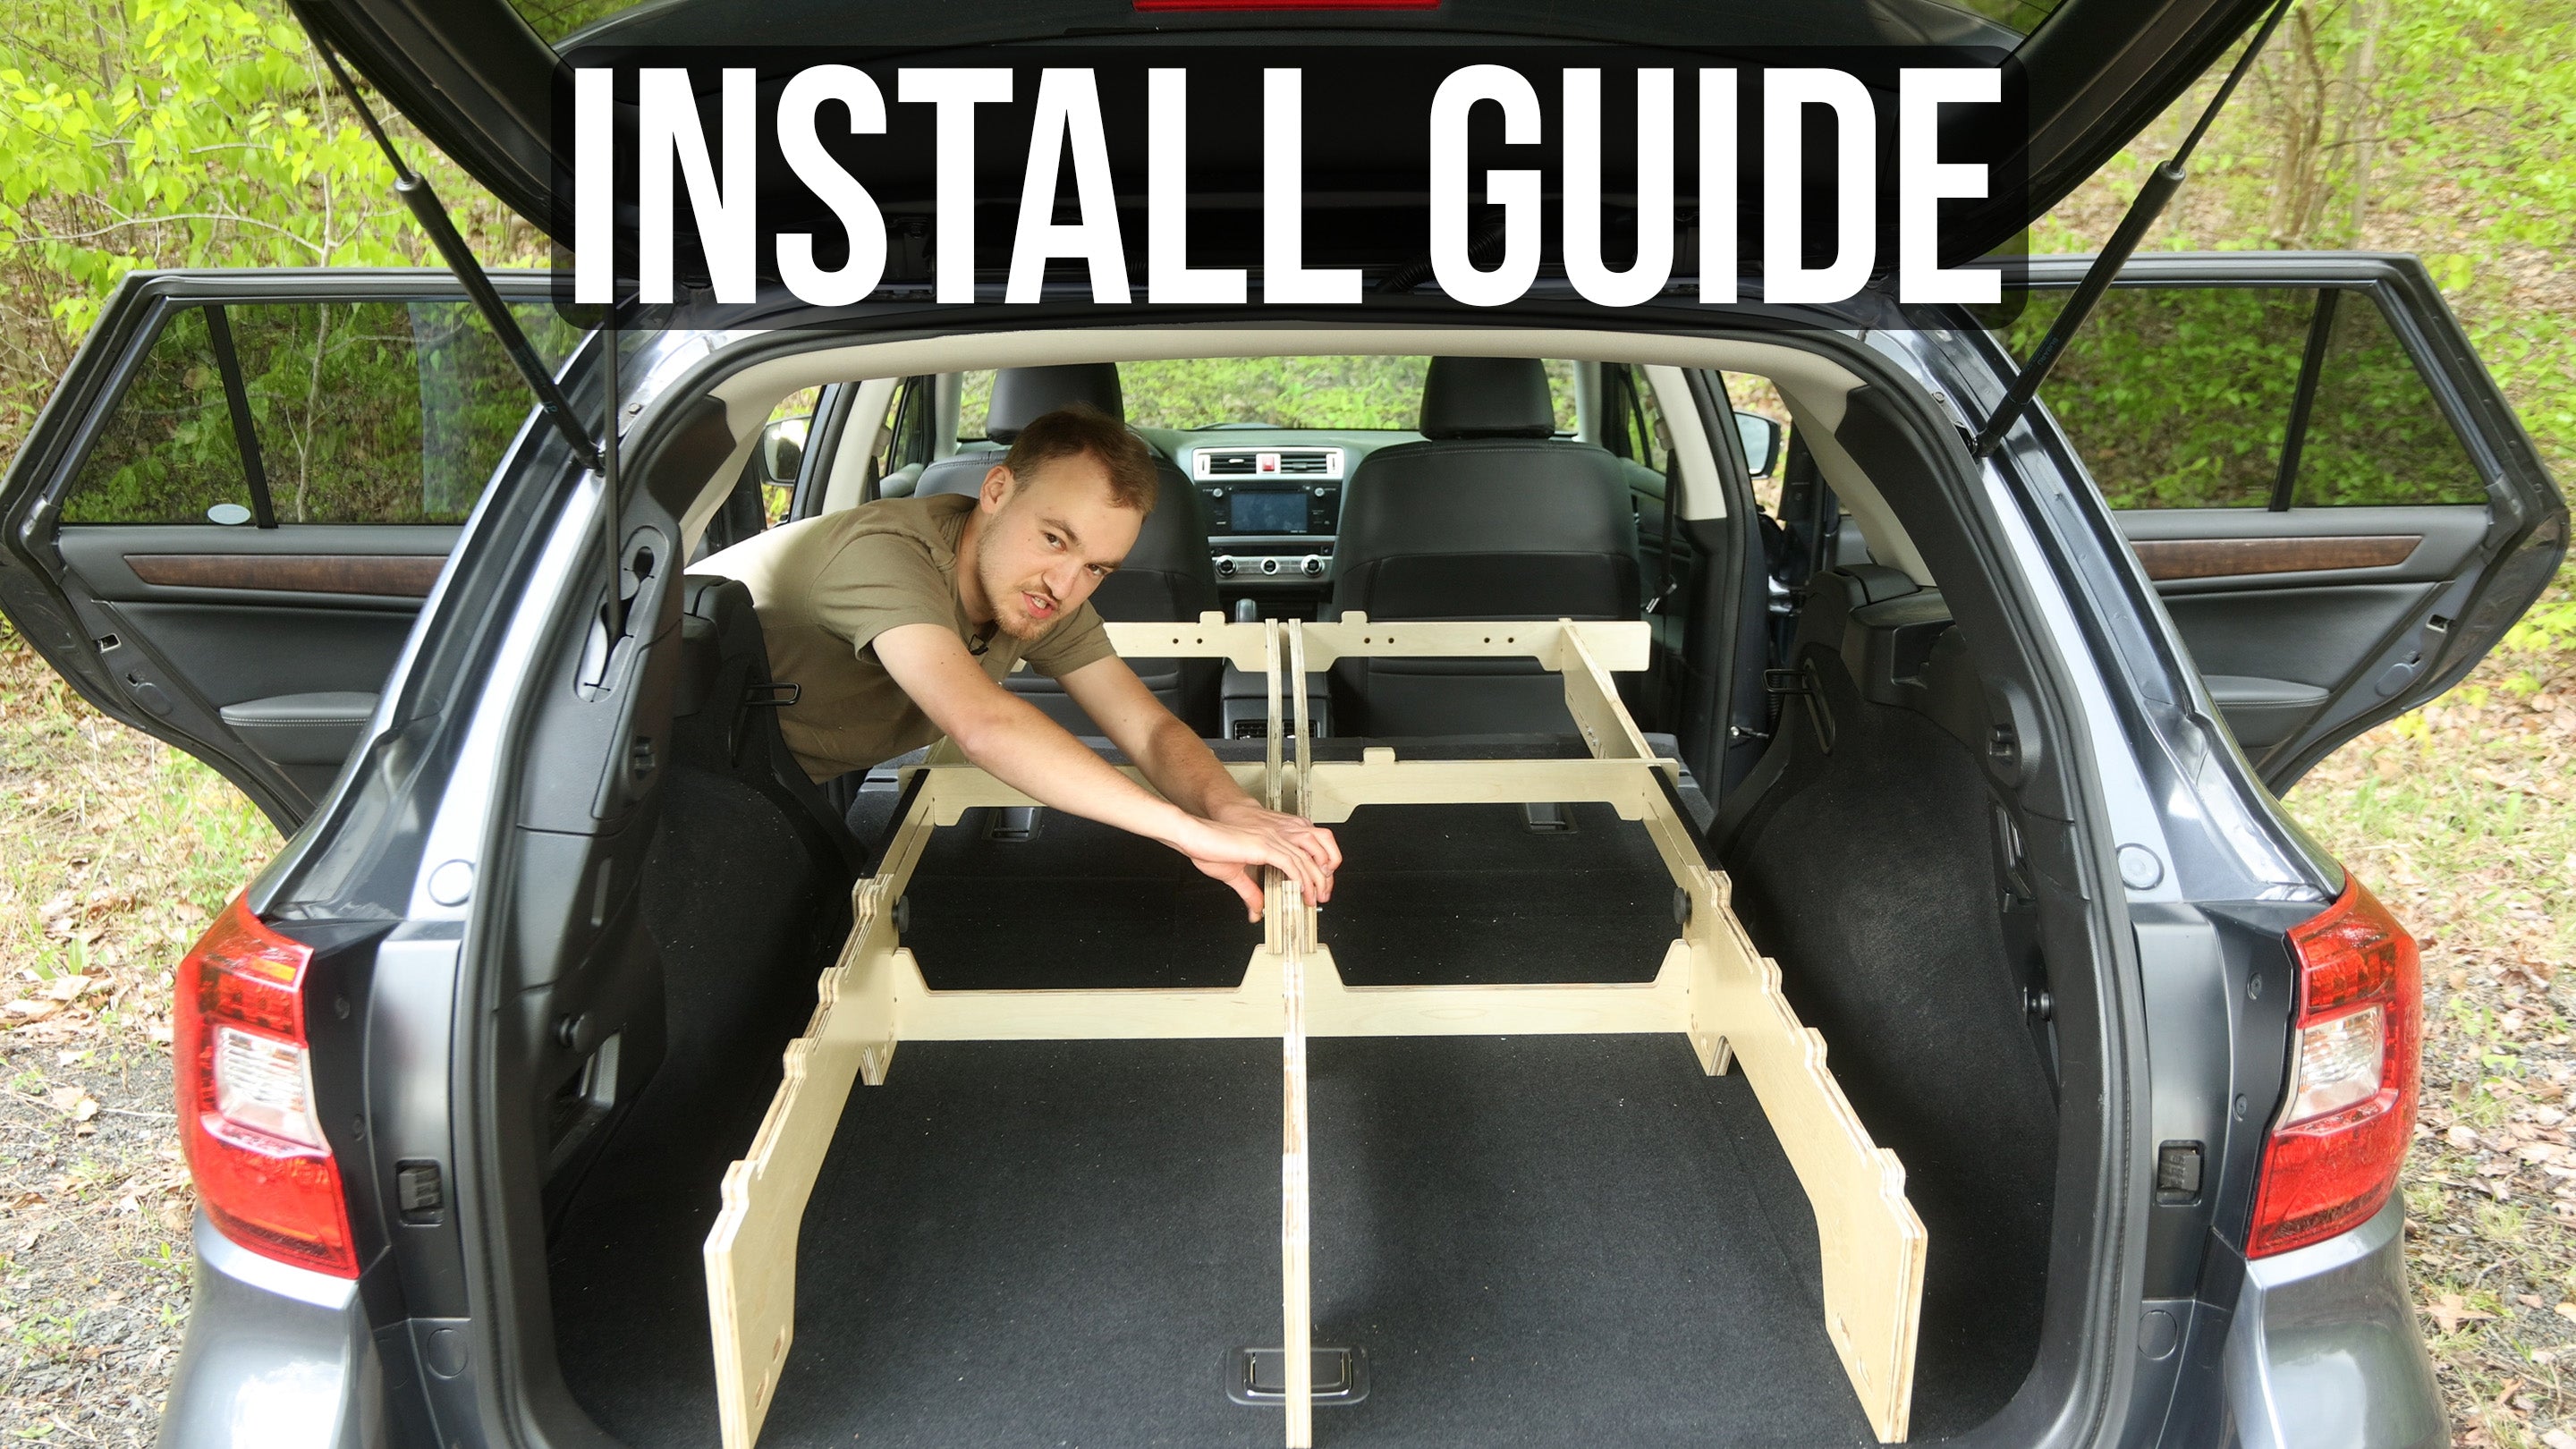 Load video: This install video will guide you step-by-step on how to install your new Sleeping Platform for car camping in your Subaru Forester!